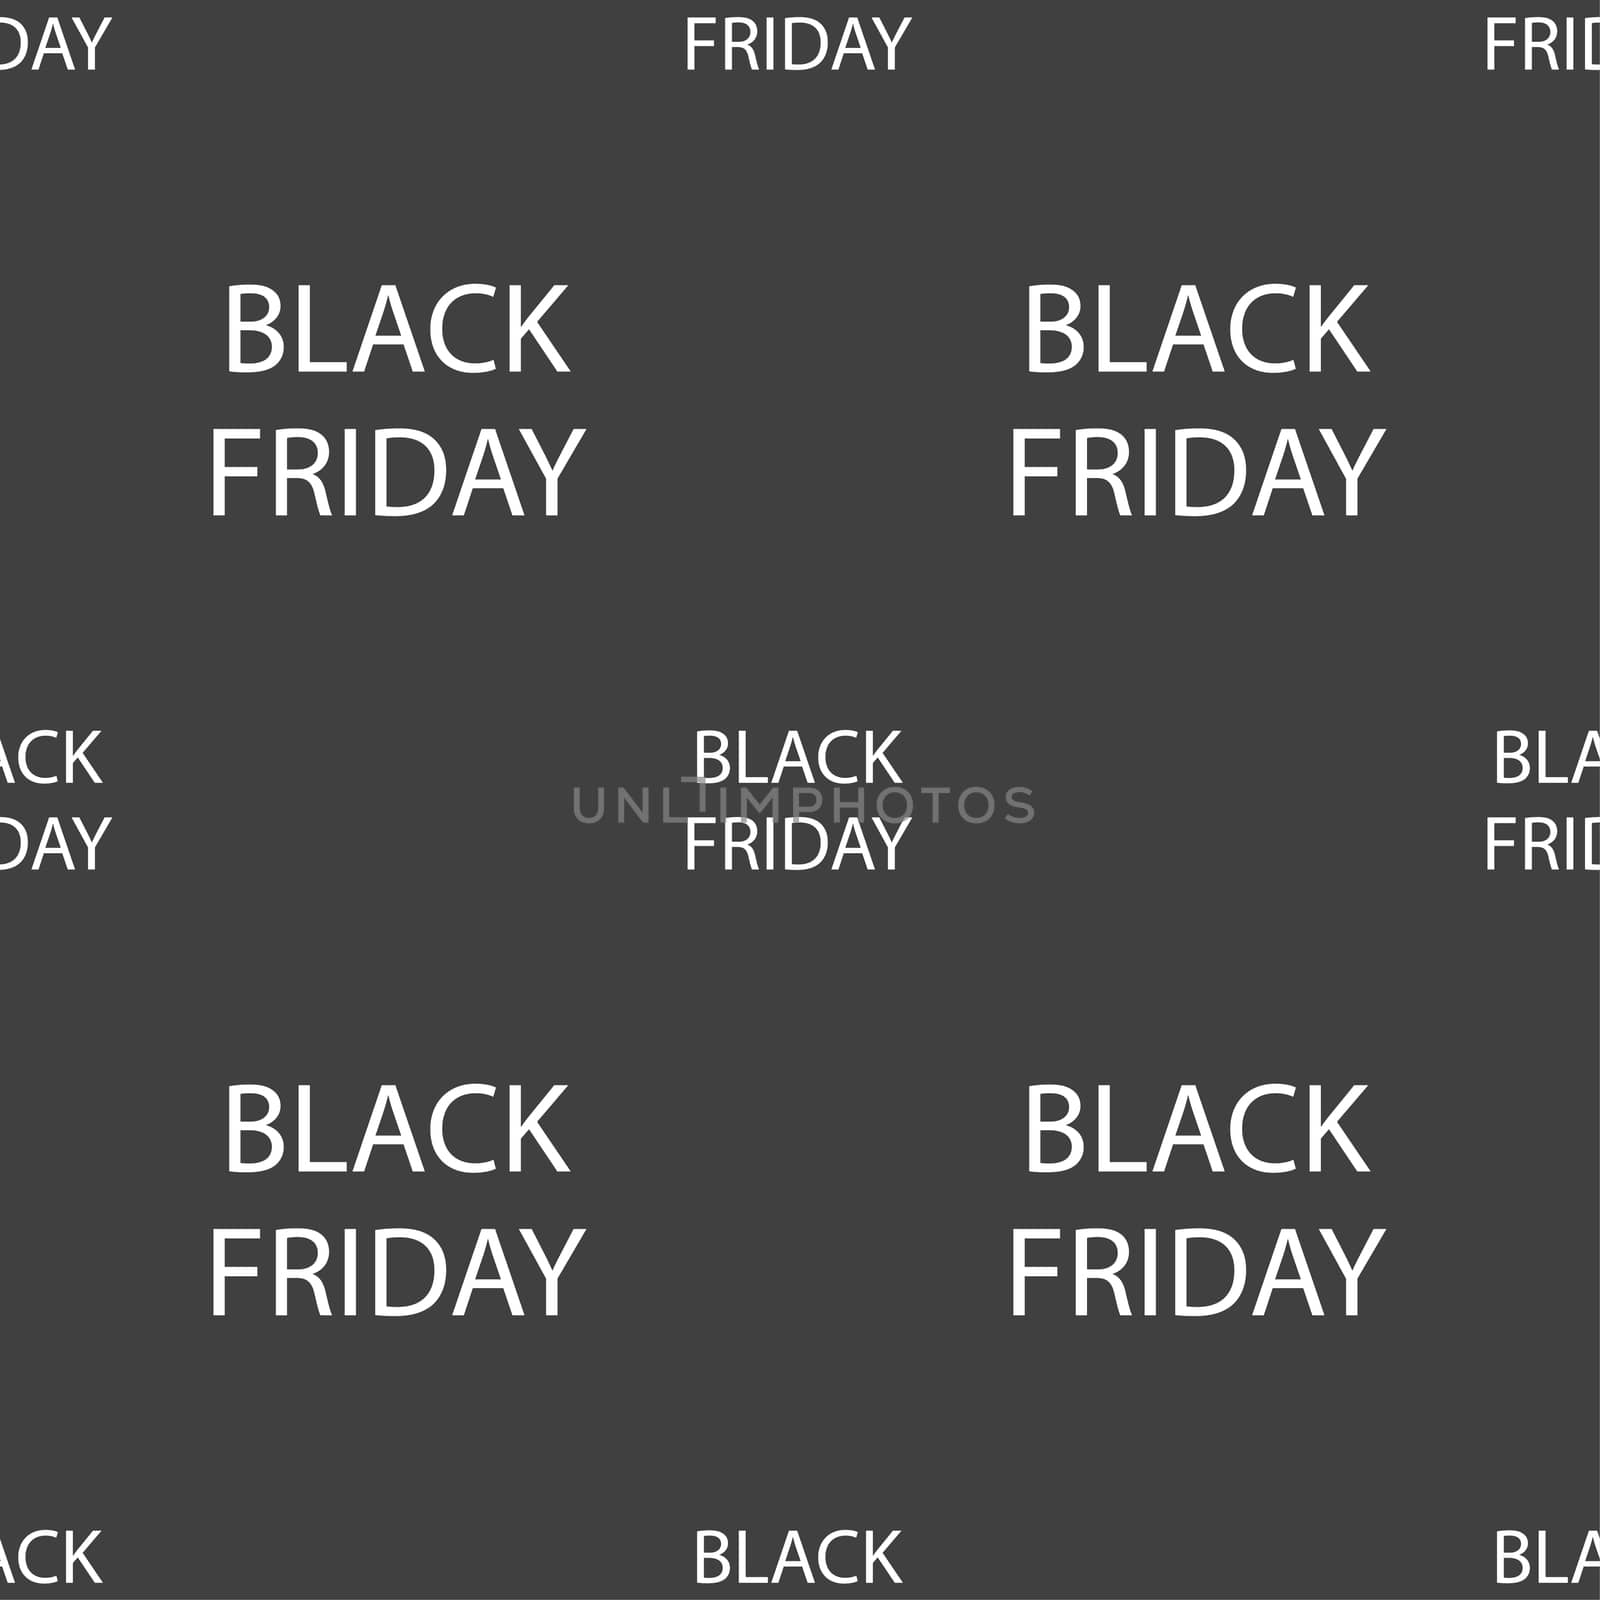 Black friday sign icon. Sale symbol.Special offer label. Seamless pattern on a gray background. illustration